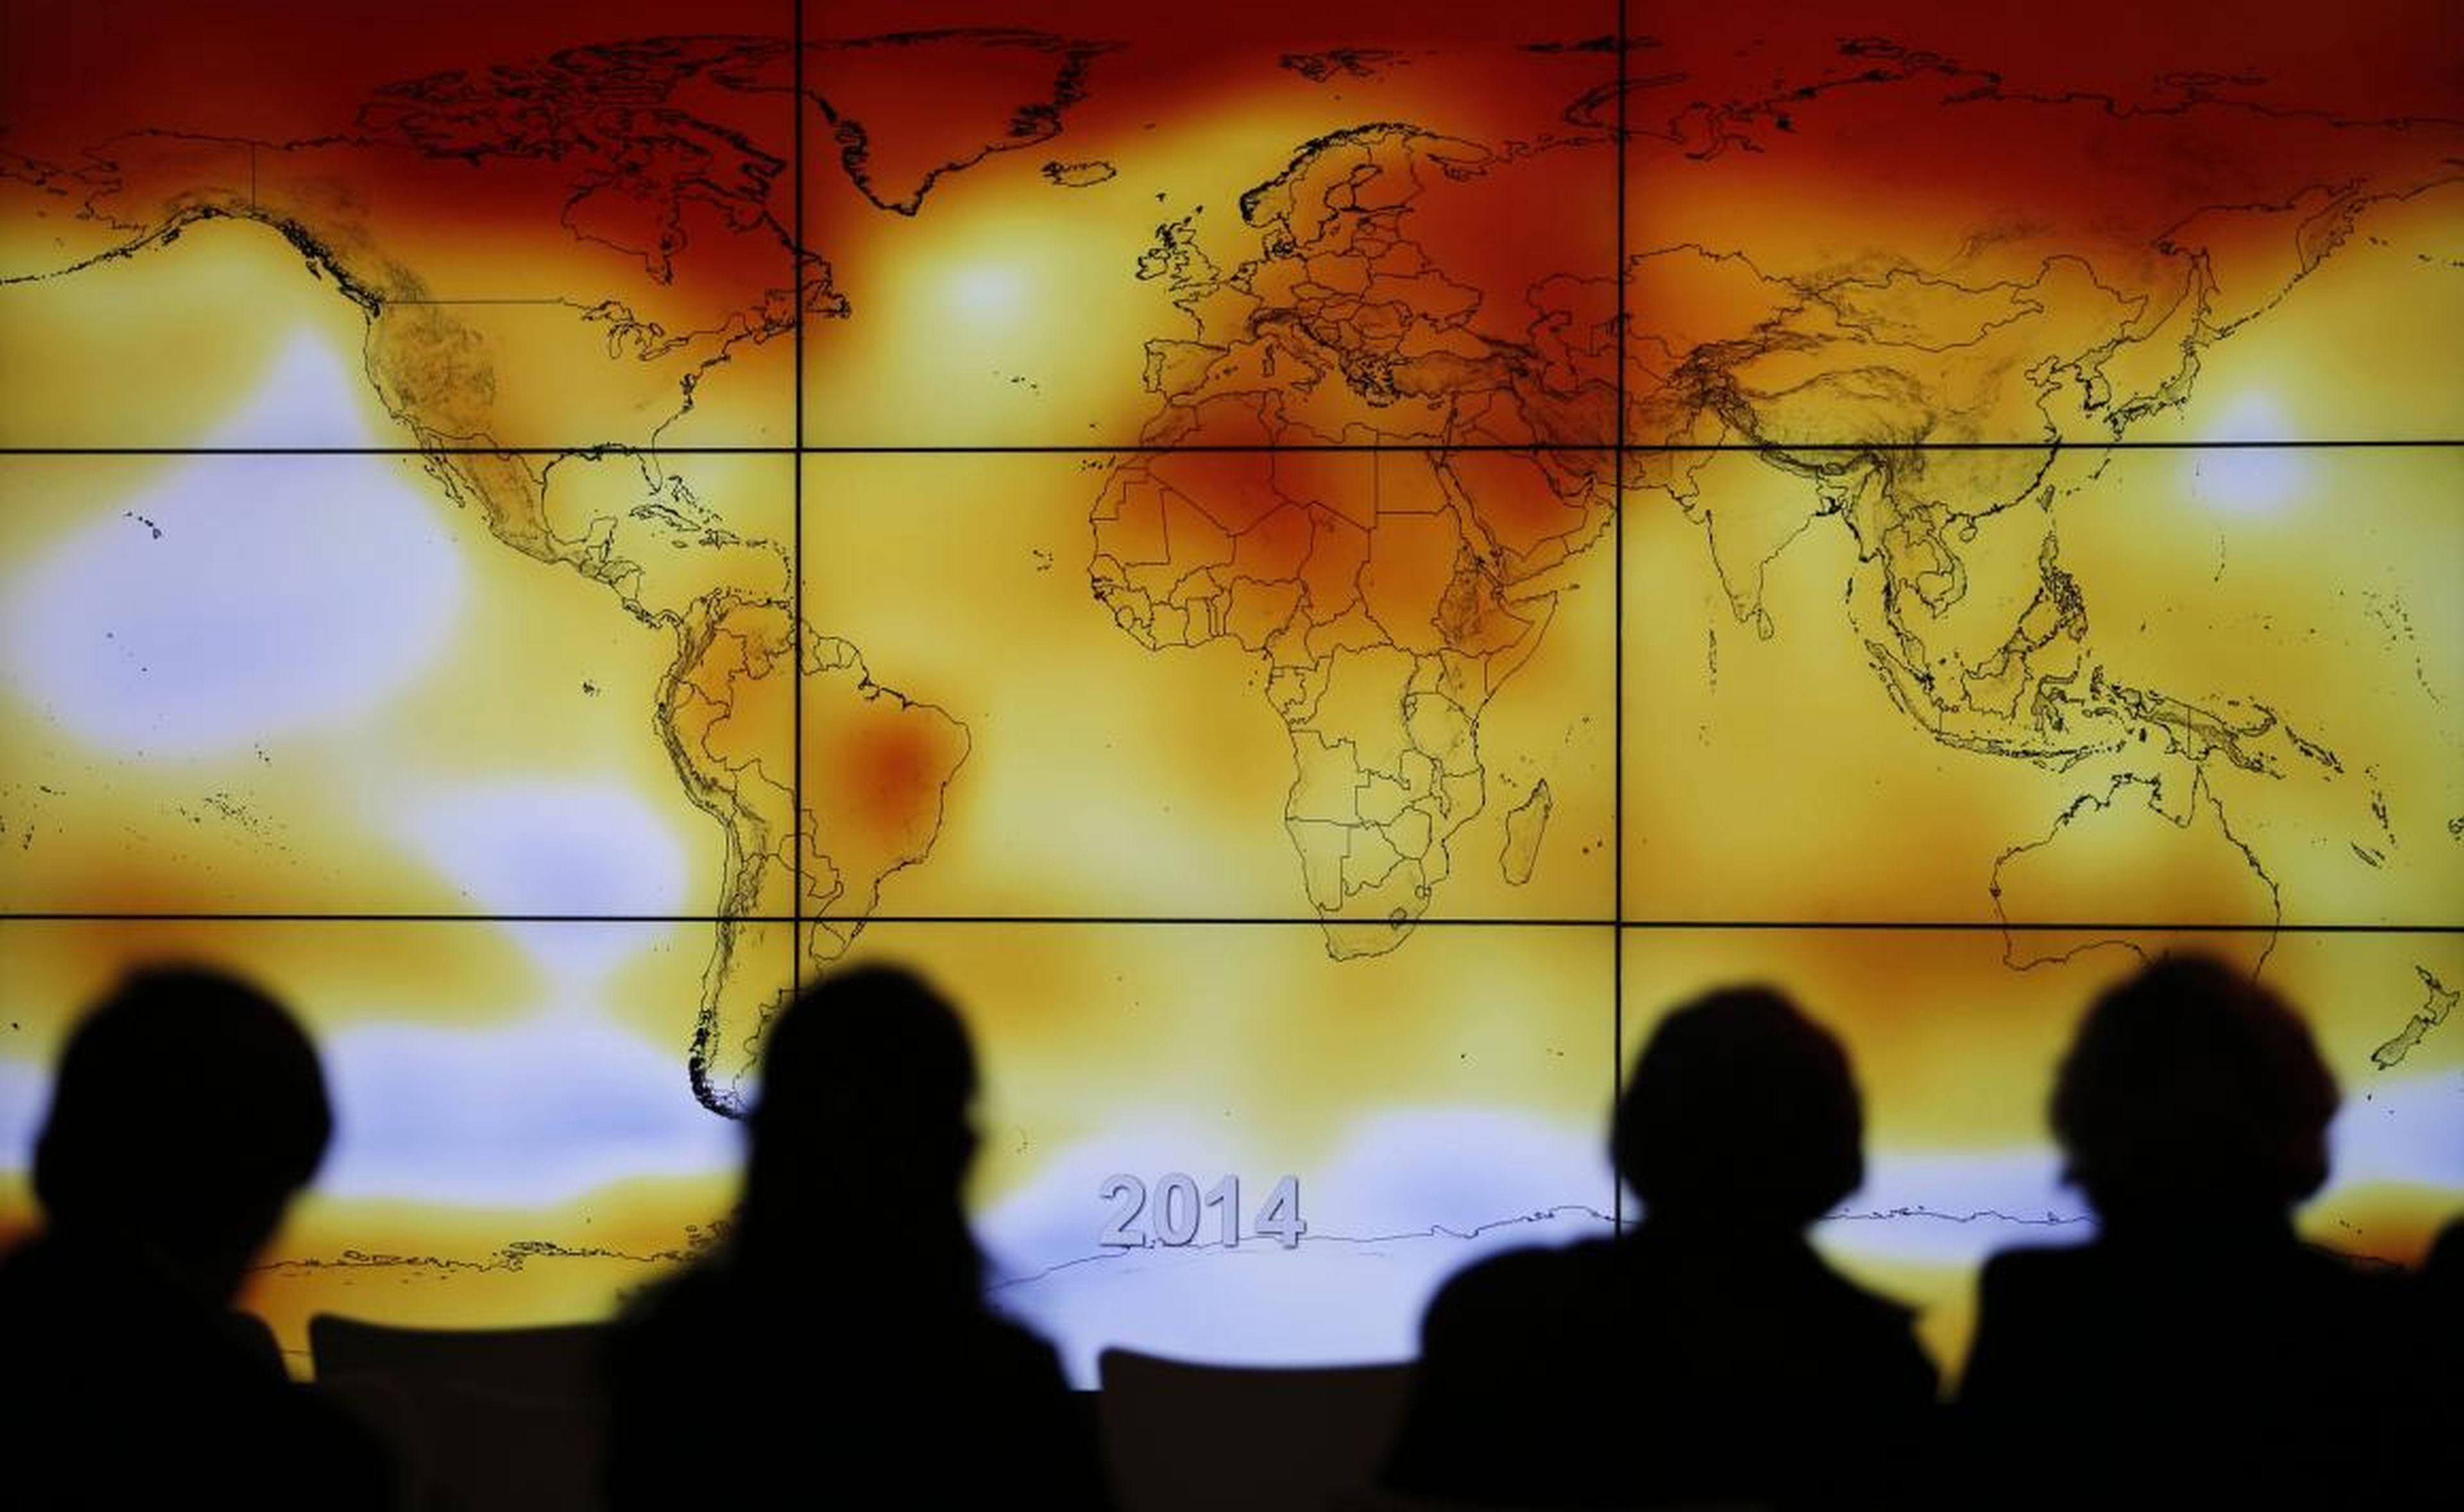 A map of Earth showing average temperatures in 2014.